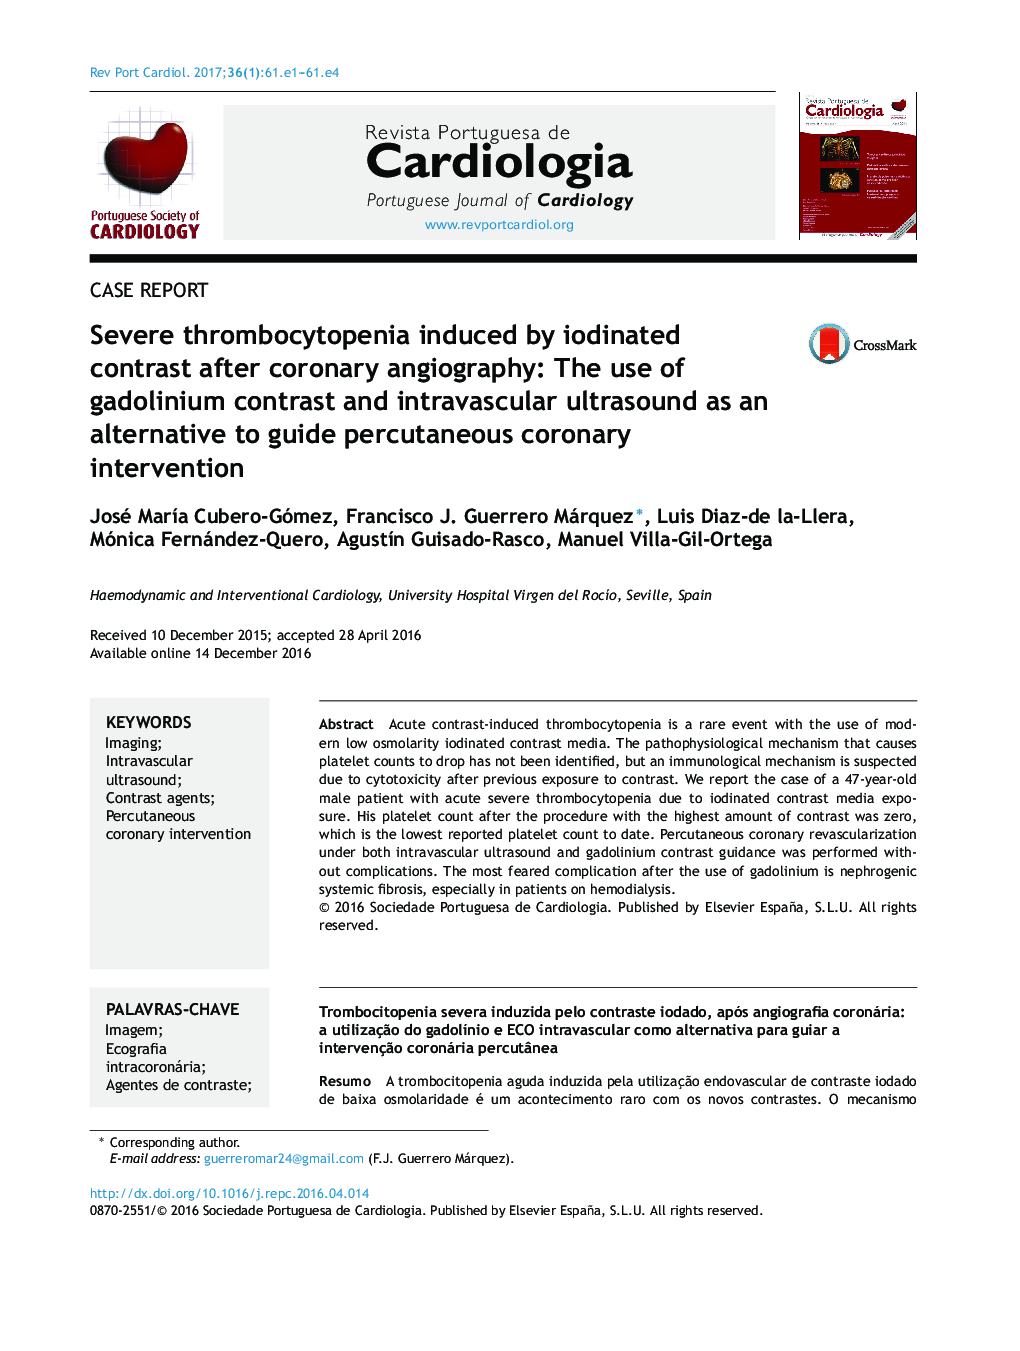 Severe thrombocytopenia induced by iodinated contrast after coronary angiography: The use of gadolinium contrast and intravascular ultrasound as an alternative to guide percutaneous coronary intervention